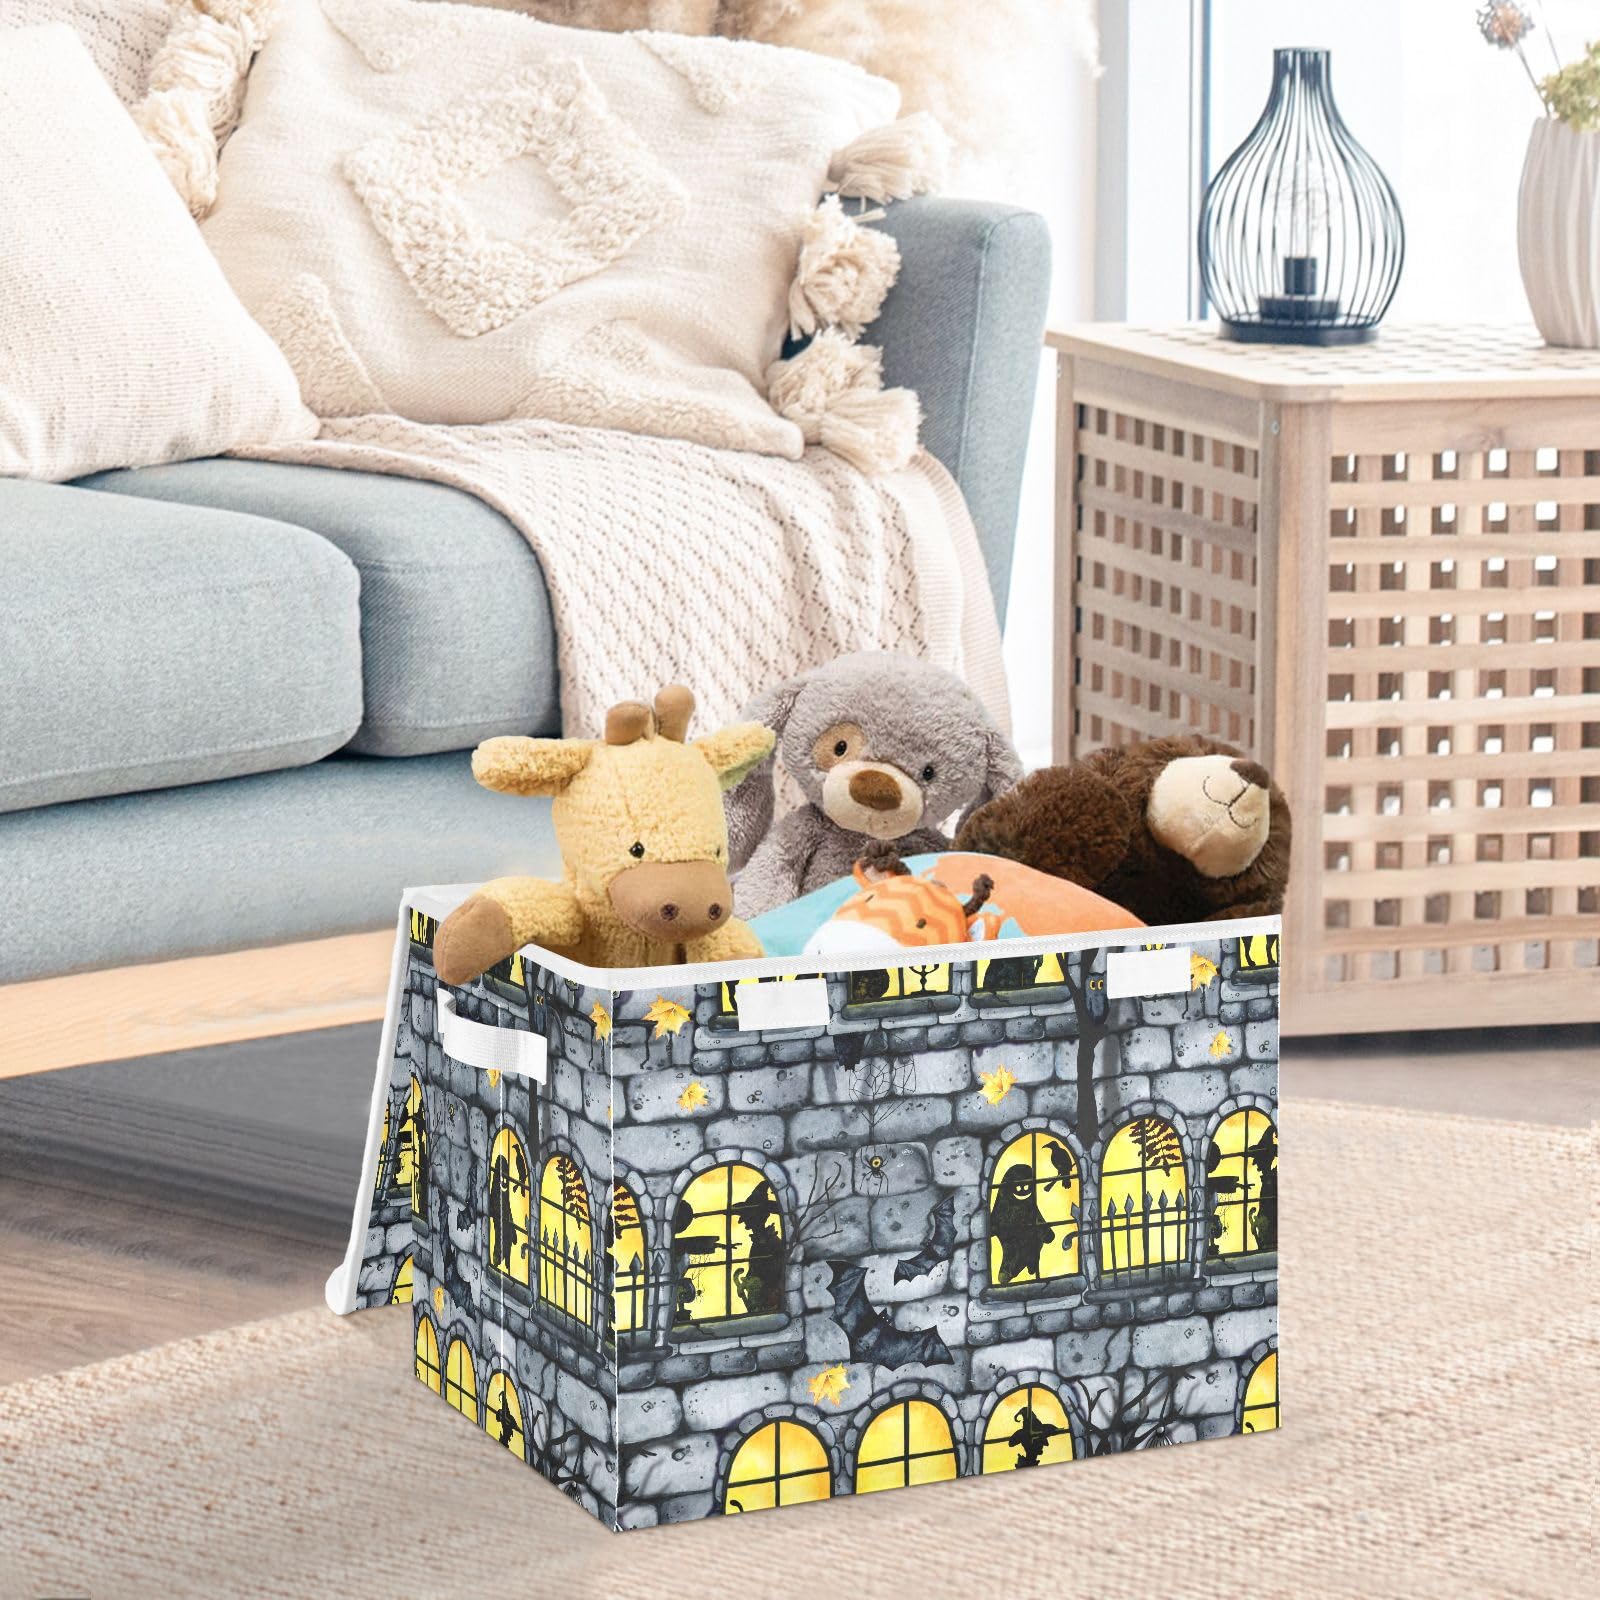 Ollabaky Gothic Castle Halloween Foldable Storage Bin with Lid Storage Box Large Cube Organizer Containers Baskets with Handles for Closet Organization, Shelves, Toys, Clothes